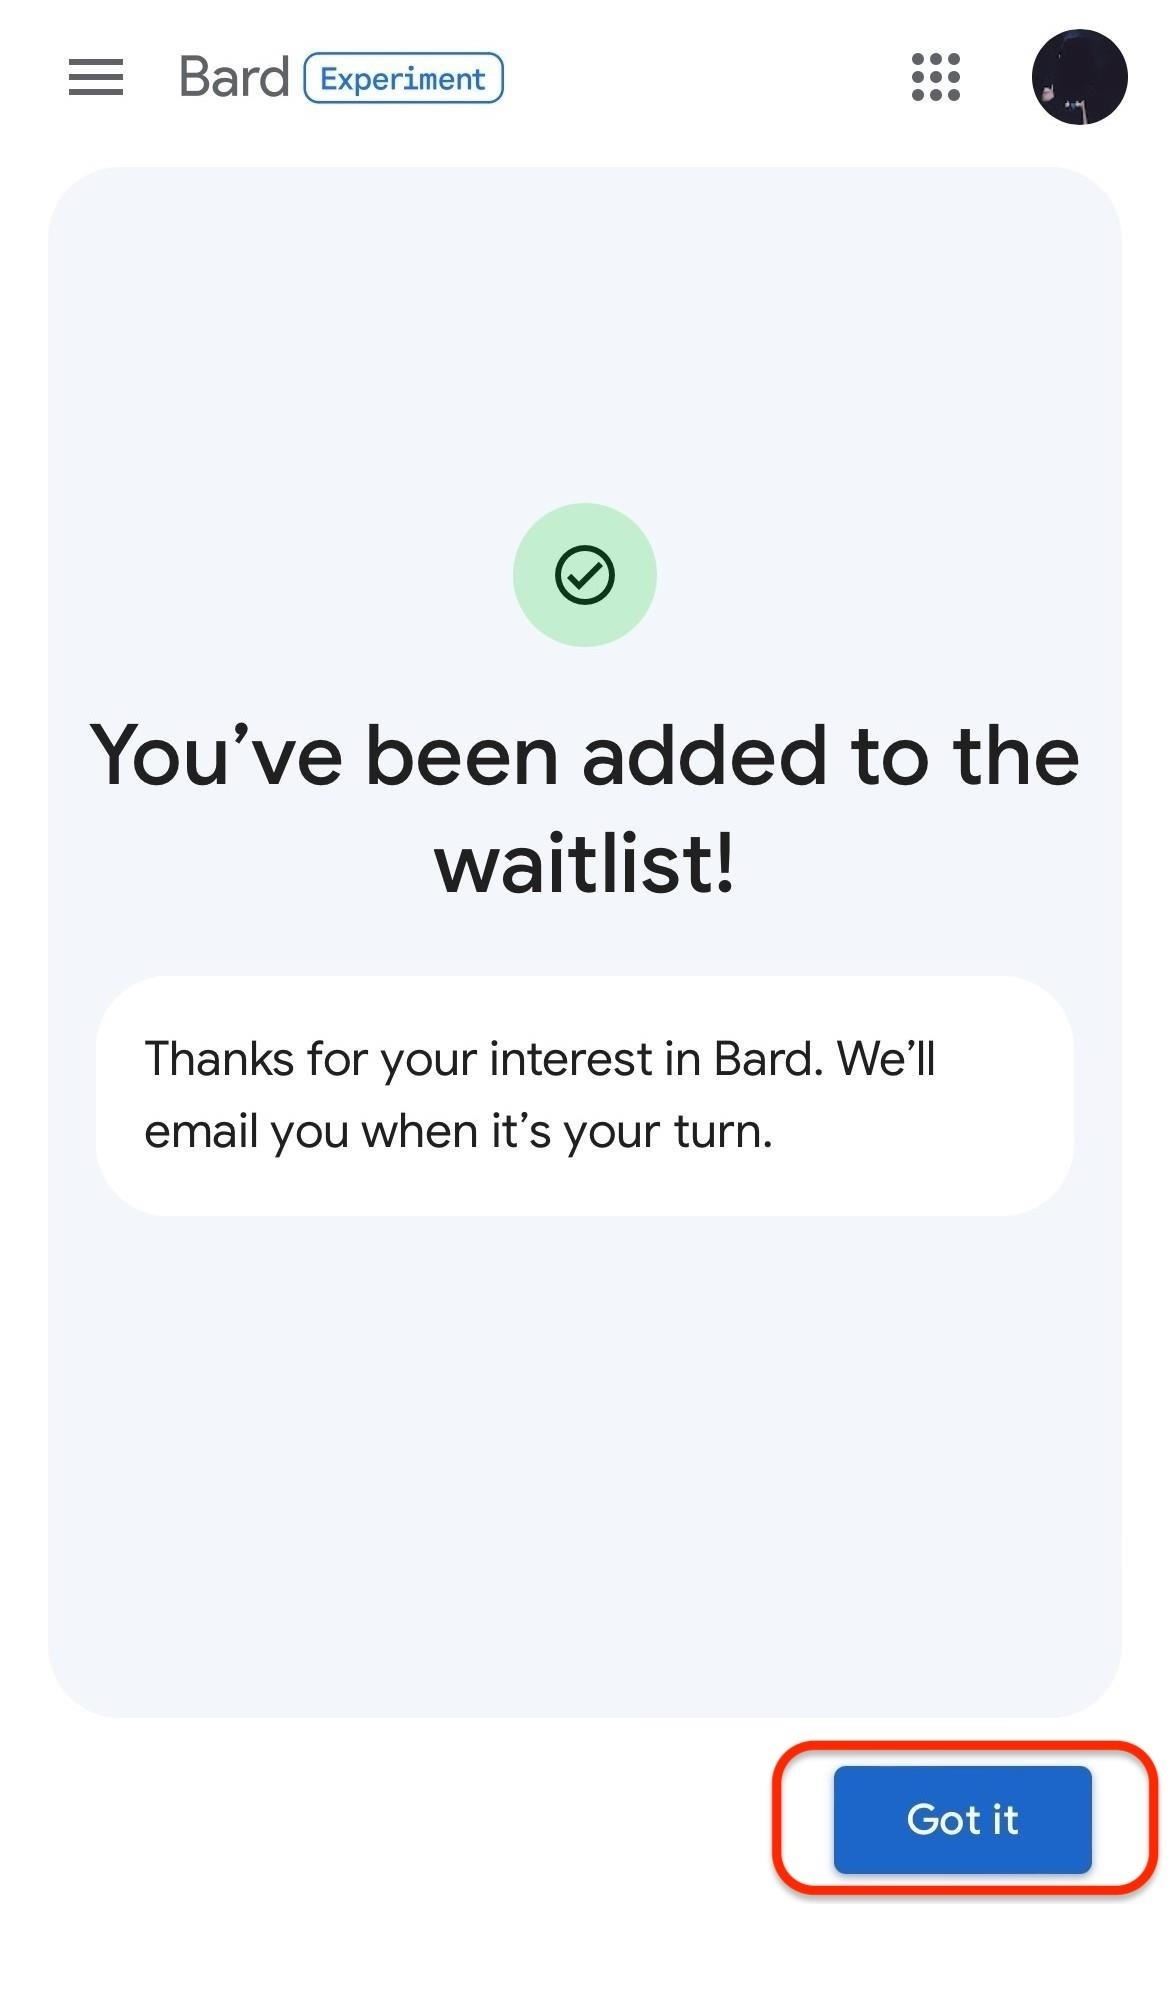 Use Google's New AI Chatbot Bard to Generate Text-Based Content on Anything